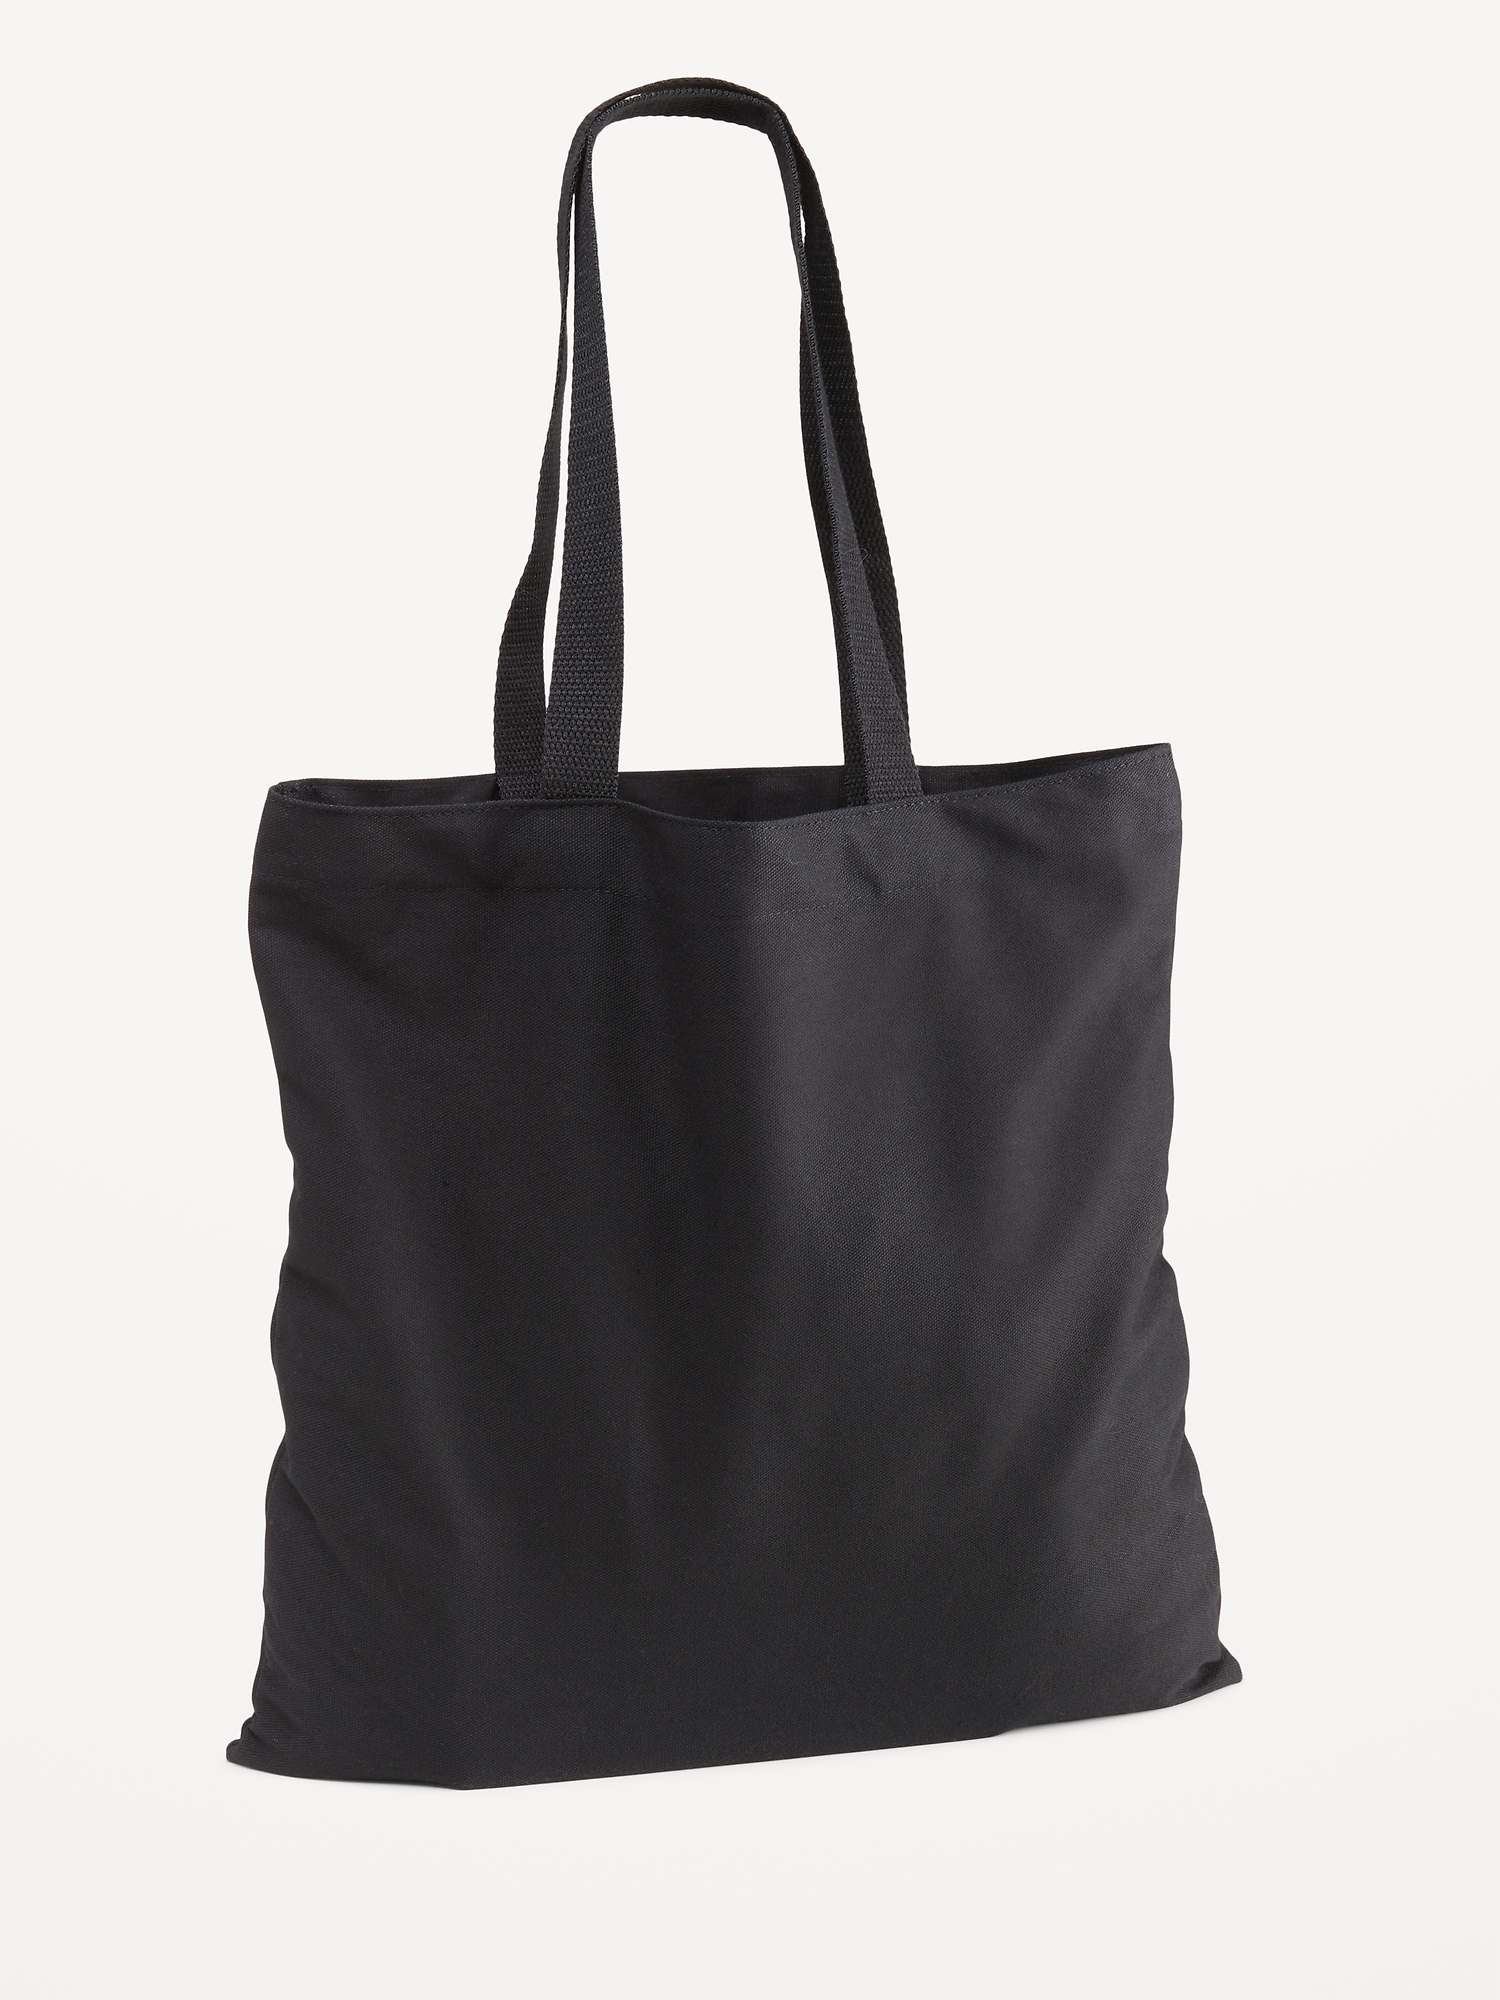 Halloween Canvas Tote Bag for Adults | Old Navy